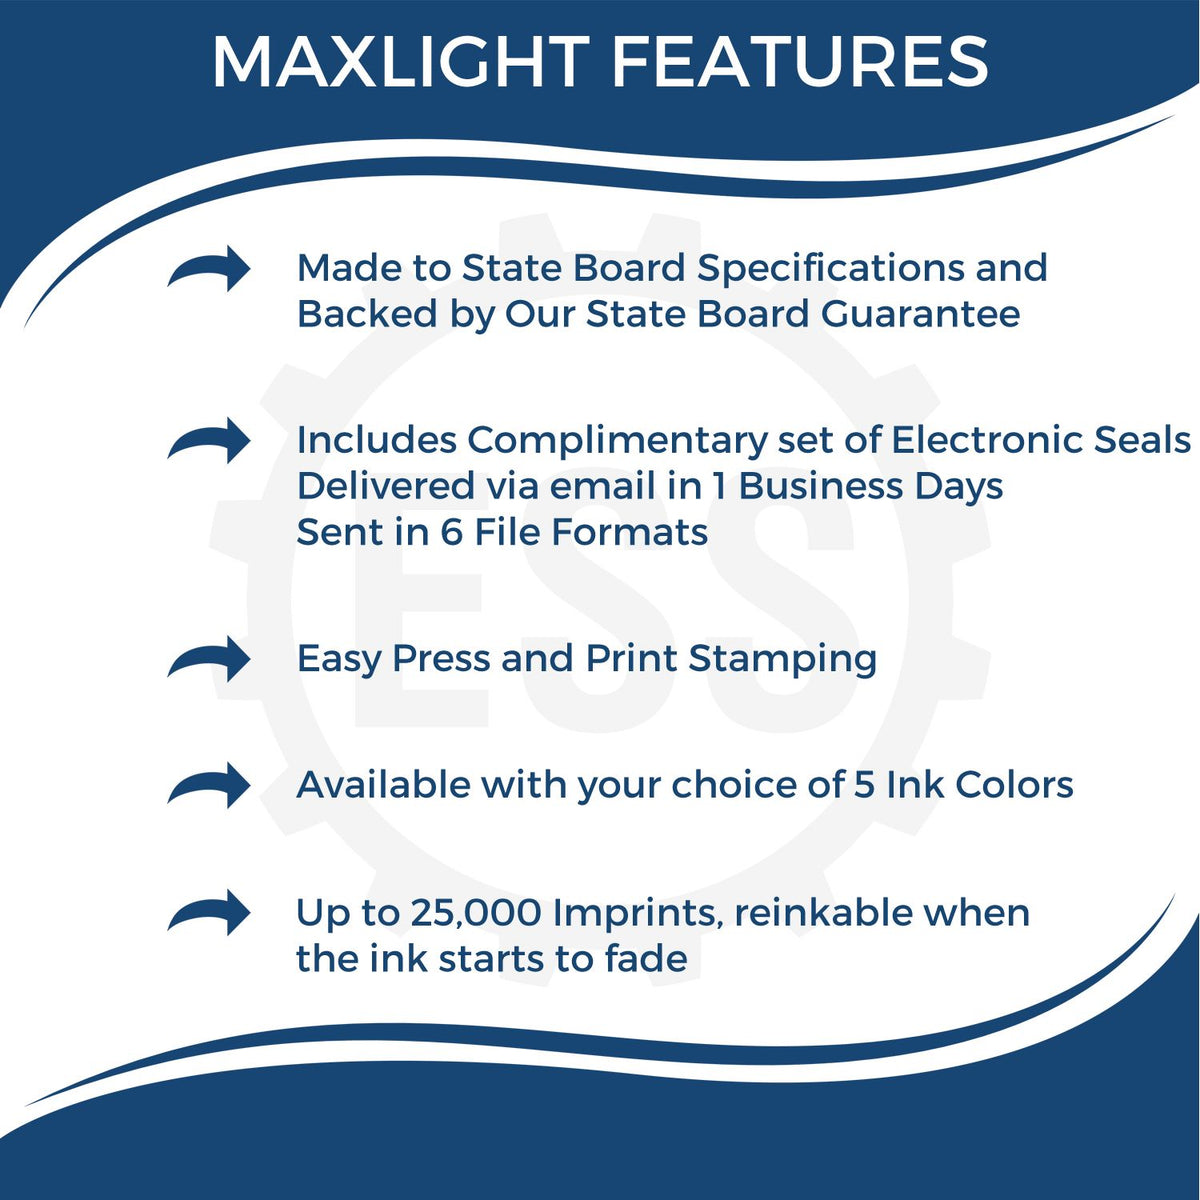 A picture of an infographic highlighting the selling points for the Premium MaxLight Pre-Inked North Carolina Engineering Stamp